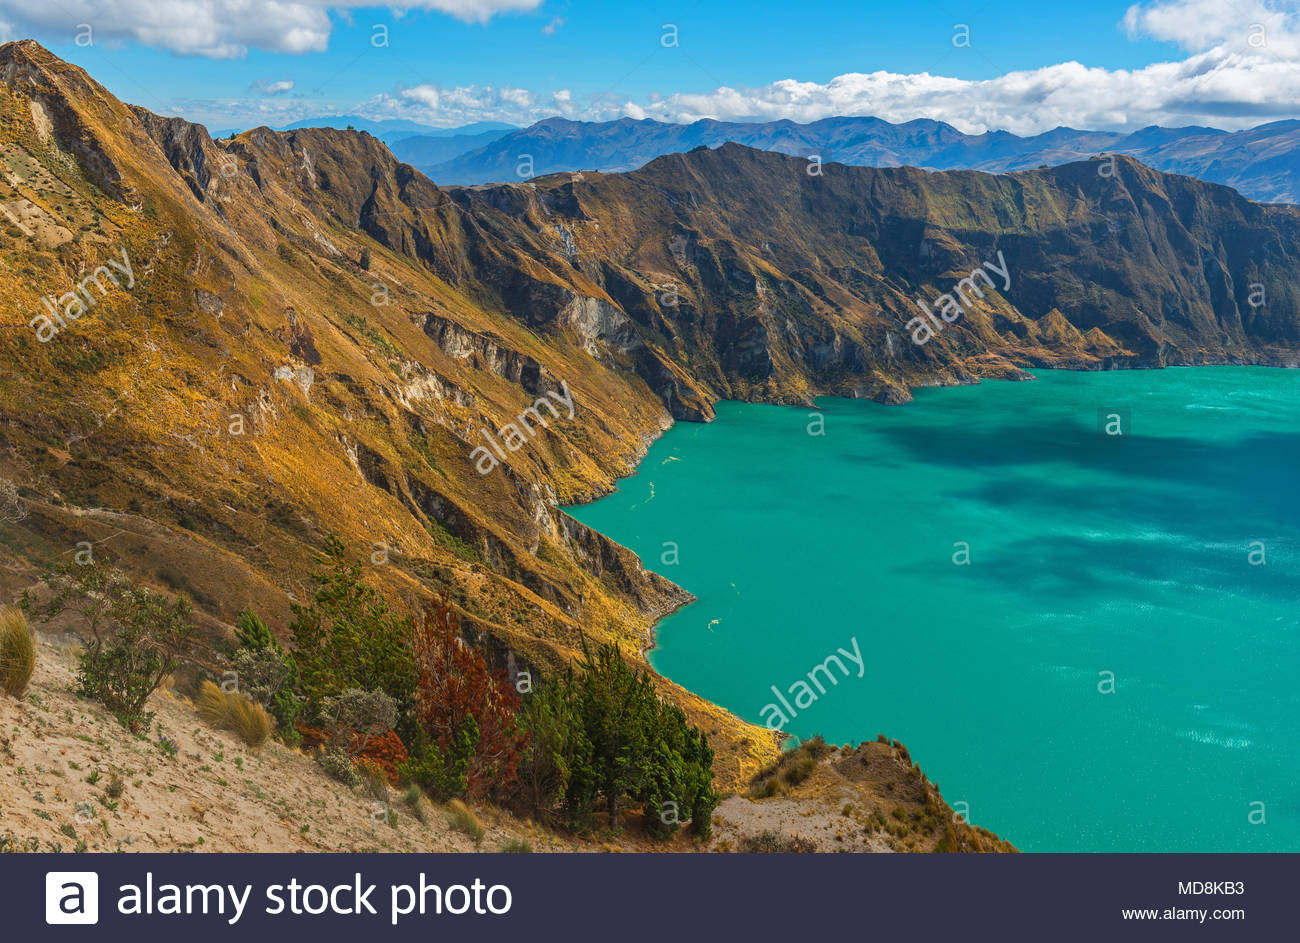 Landscape Of The Quilotoa Crater Lake With Its Turquoise Blue